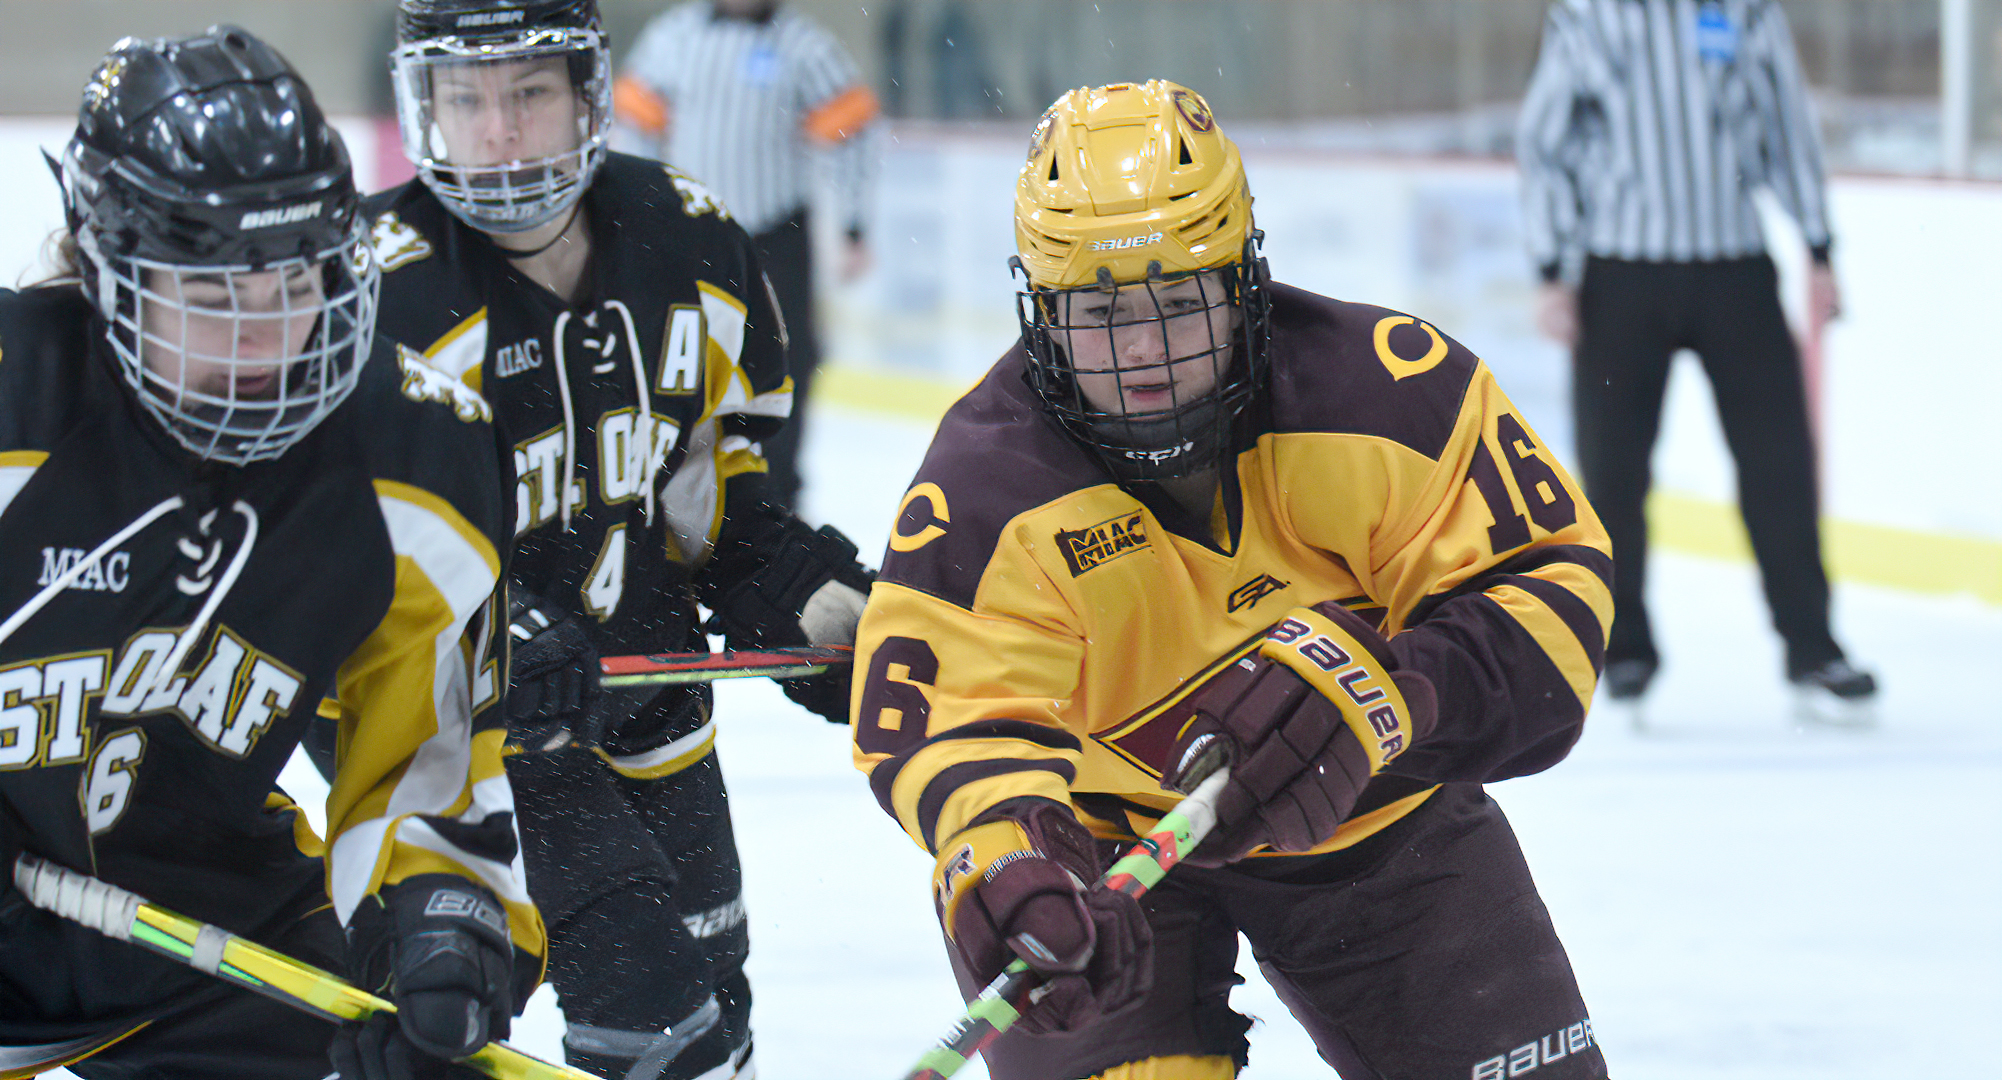 Brenna Mjoness tangles with a defender during the  Cobbers' game with St. Olaf. Mjoness scored her fifth goal in the last four games in the game.